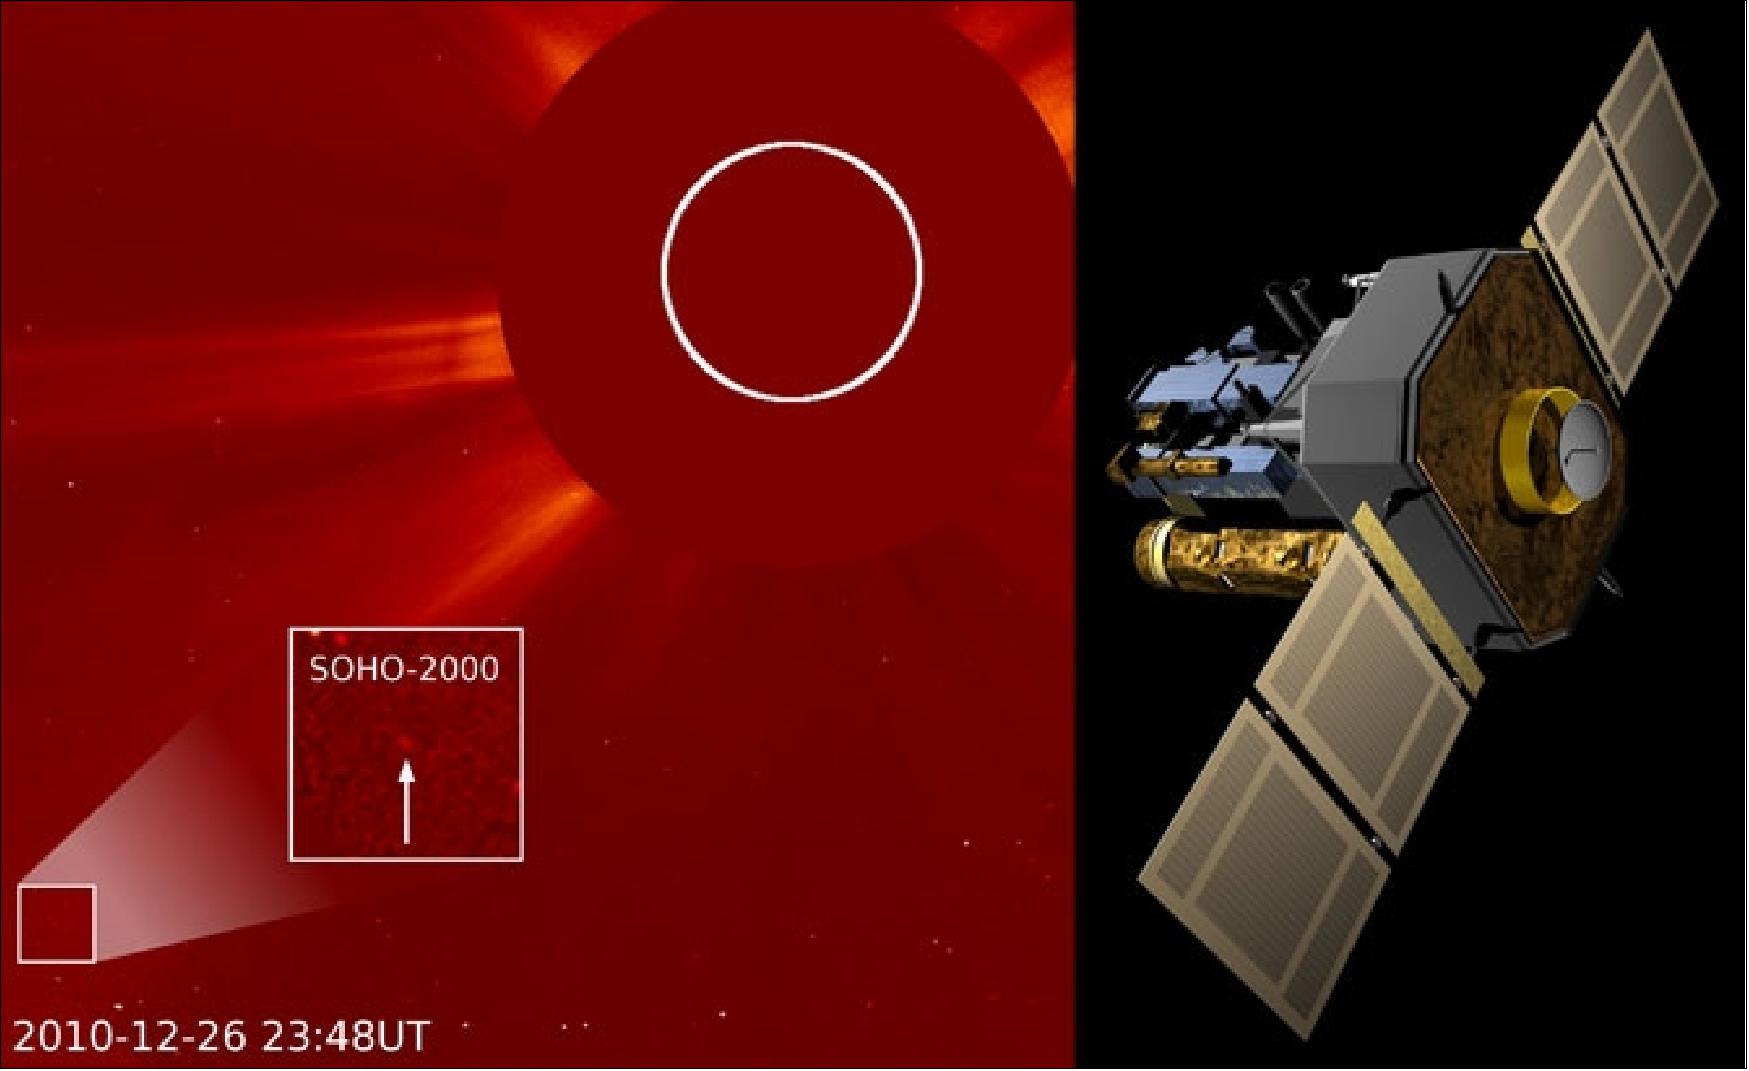 Figure 88: SOHO's 2000th comet (left), spotted by a Polish amateur astronomer on December 26, 2010 (image credit: NASA)